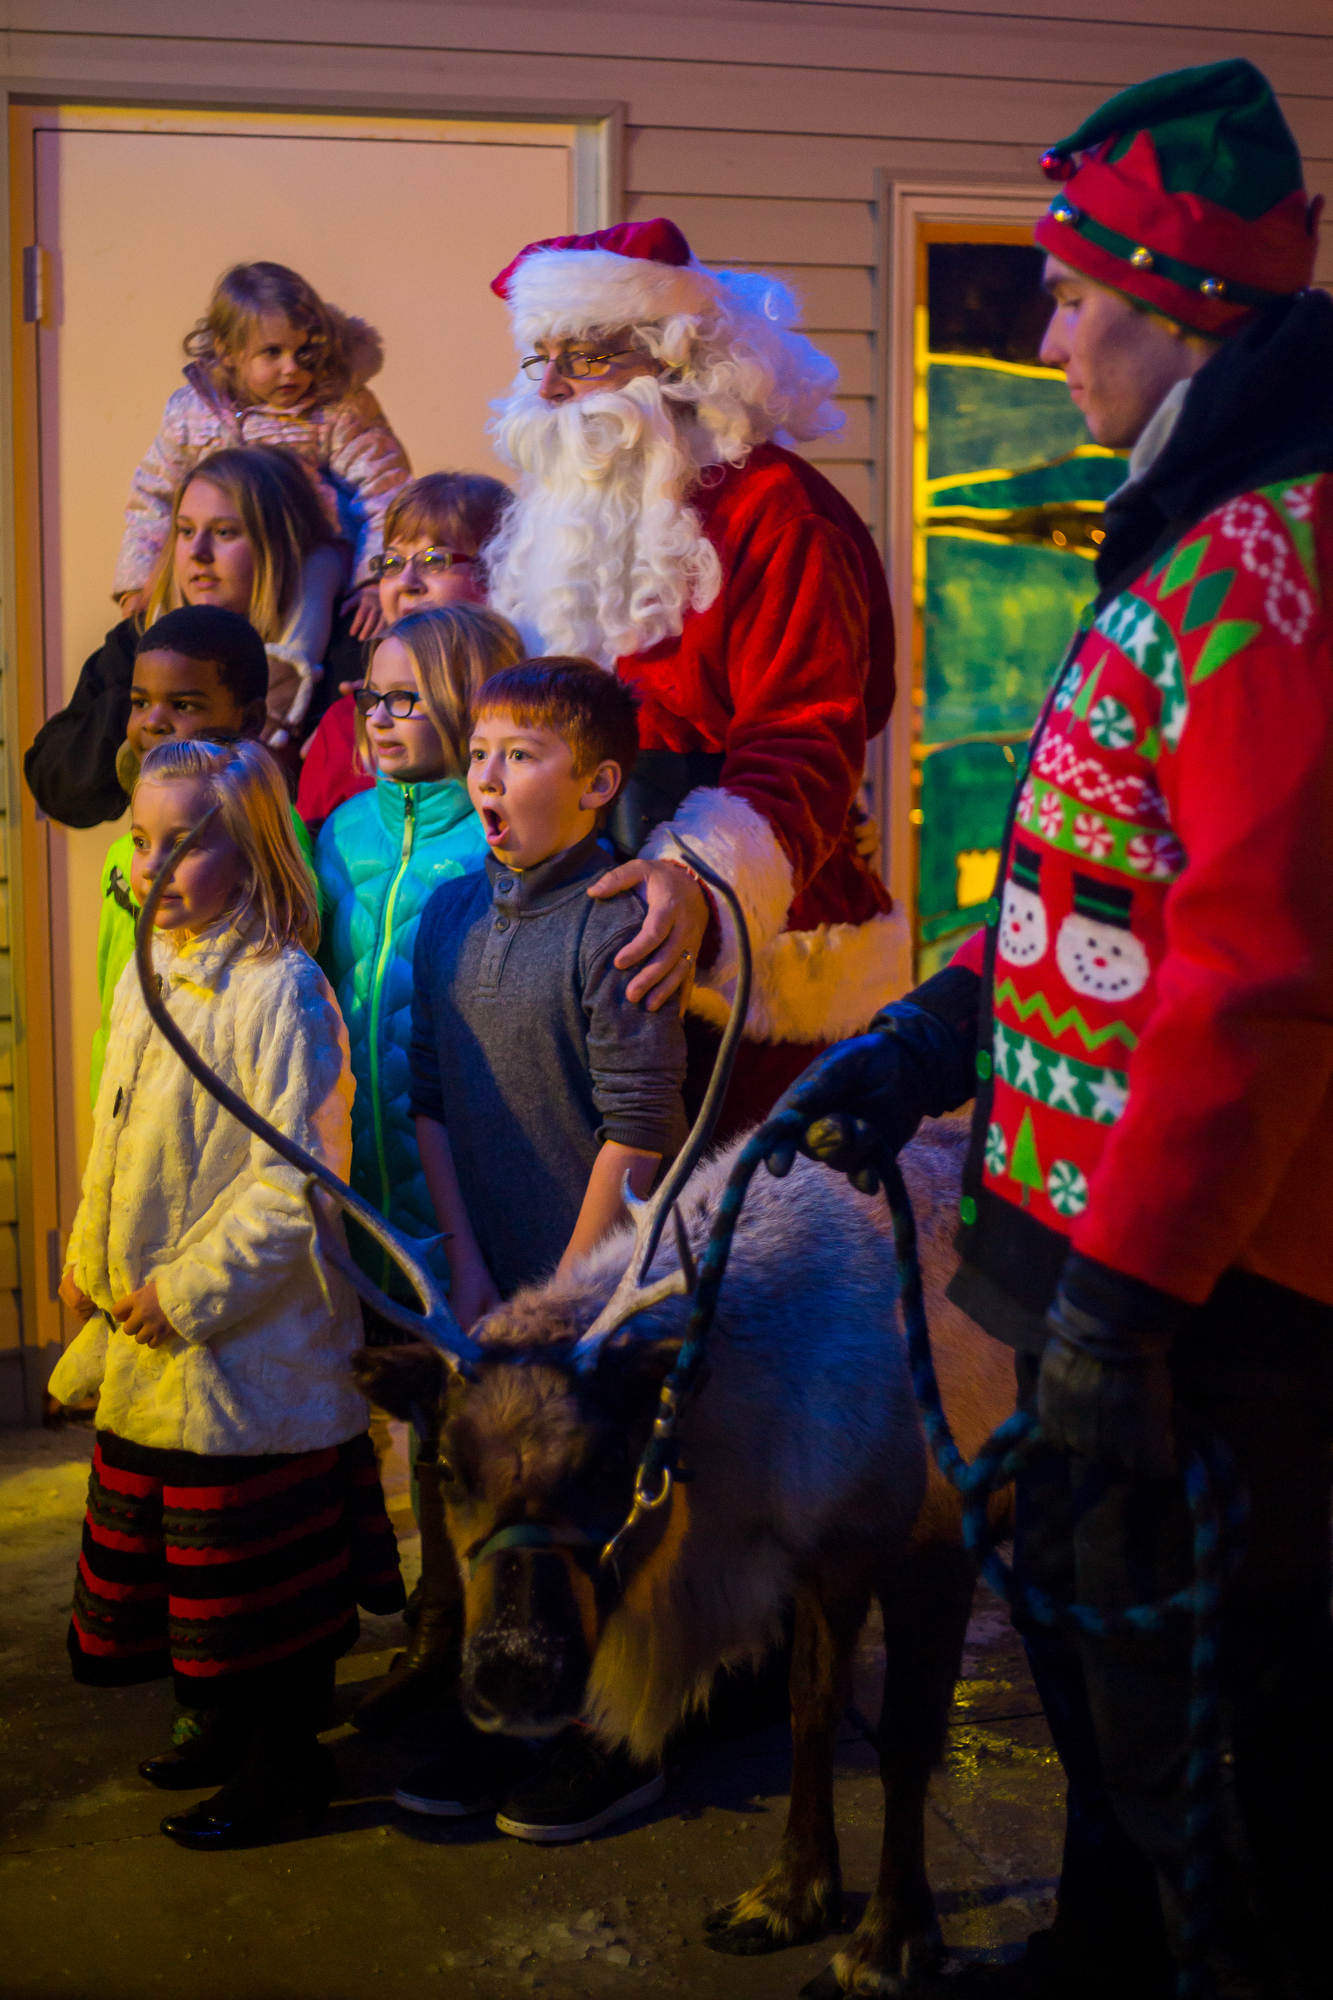  People take a photograph with Clarice, a four-year-old reindeer, at Faith Assemble Church in Belleville on Sunday, December 18, 2016. Carousel Acres has four reindeer that they take to various events and parties around Washtenaw County. Matt Weigand